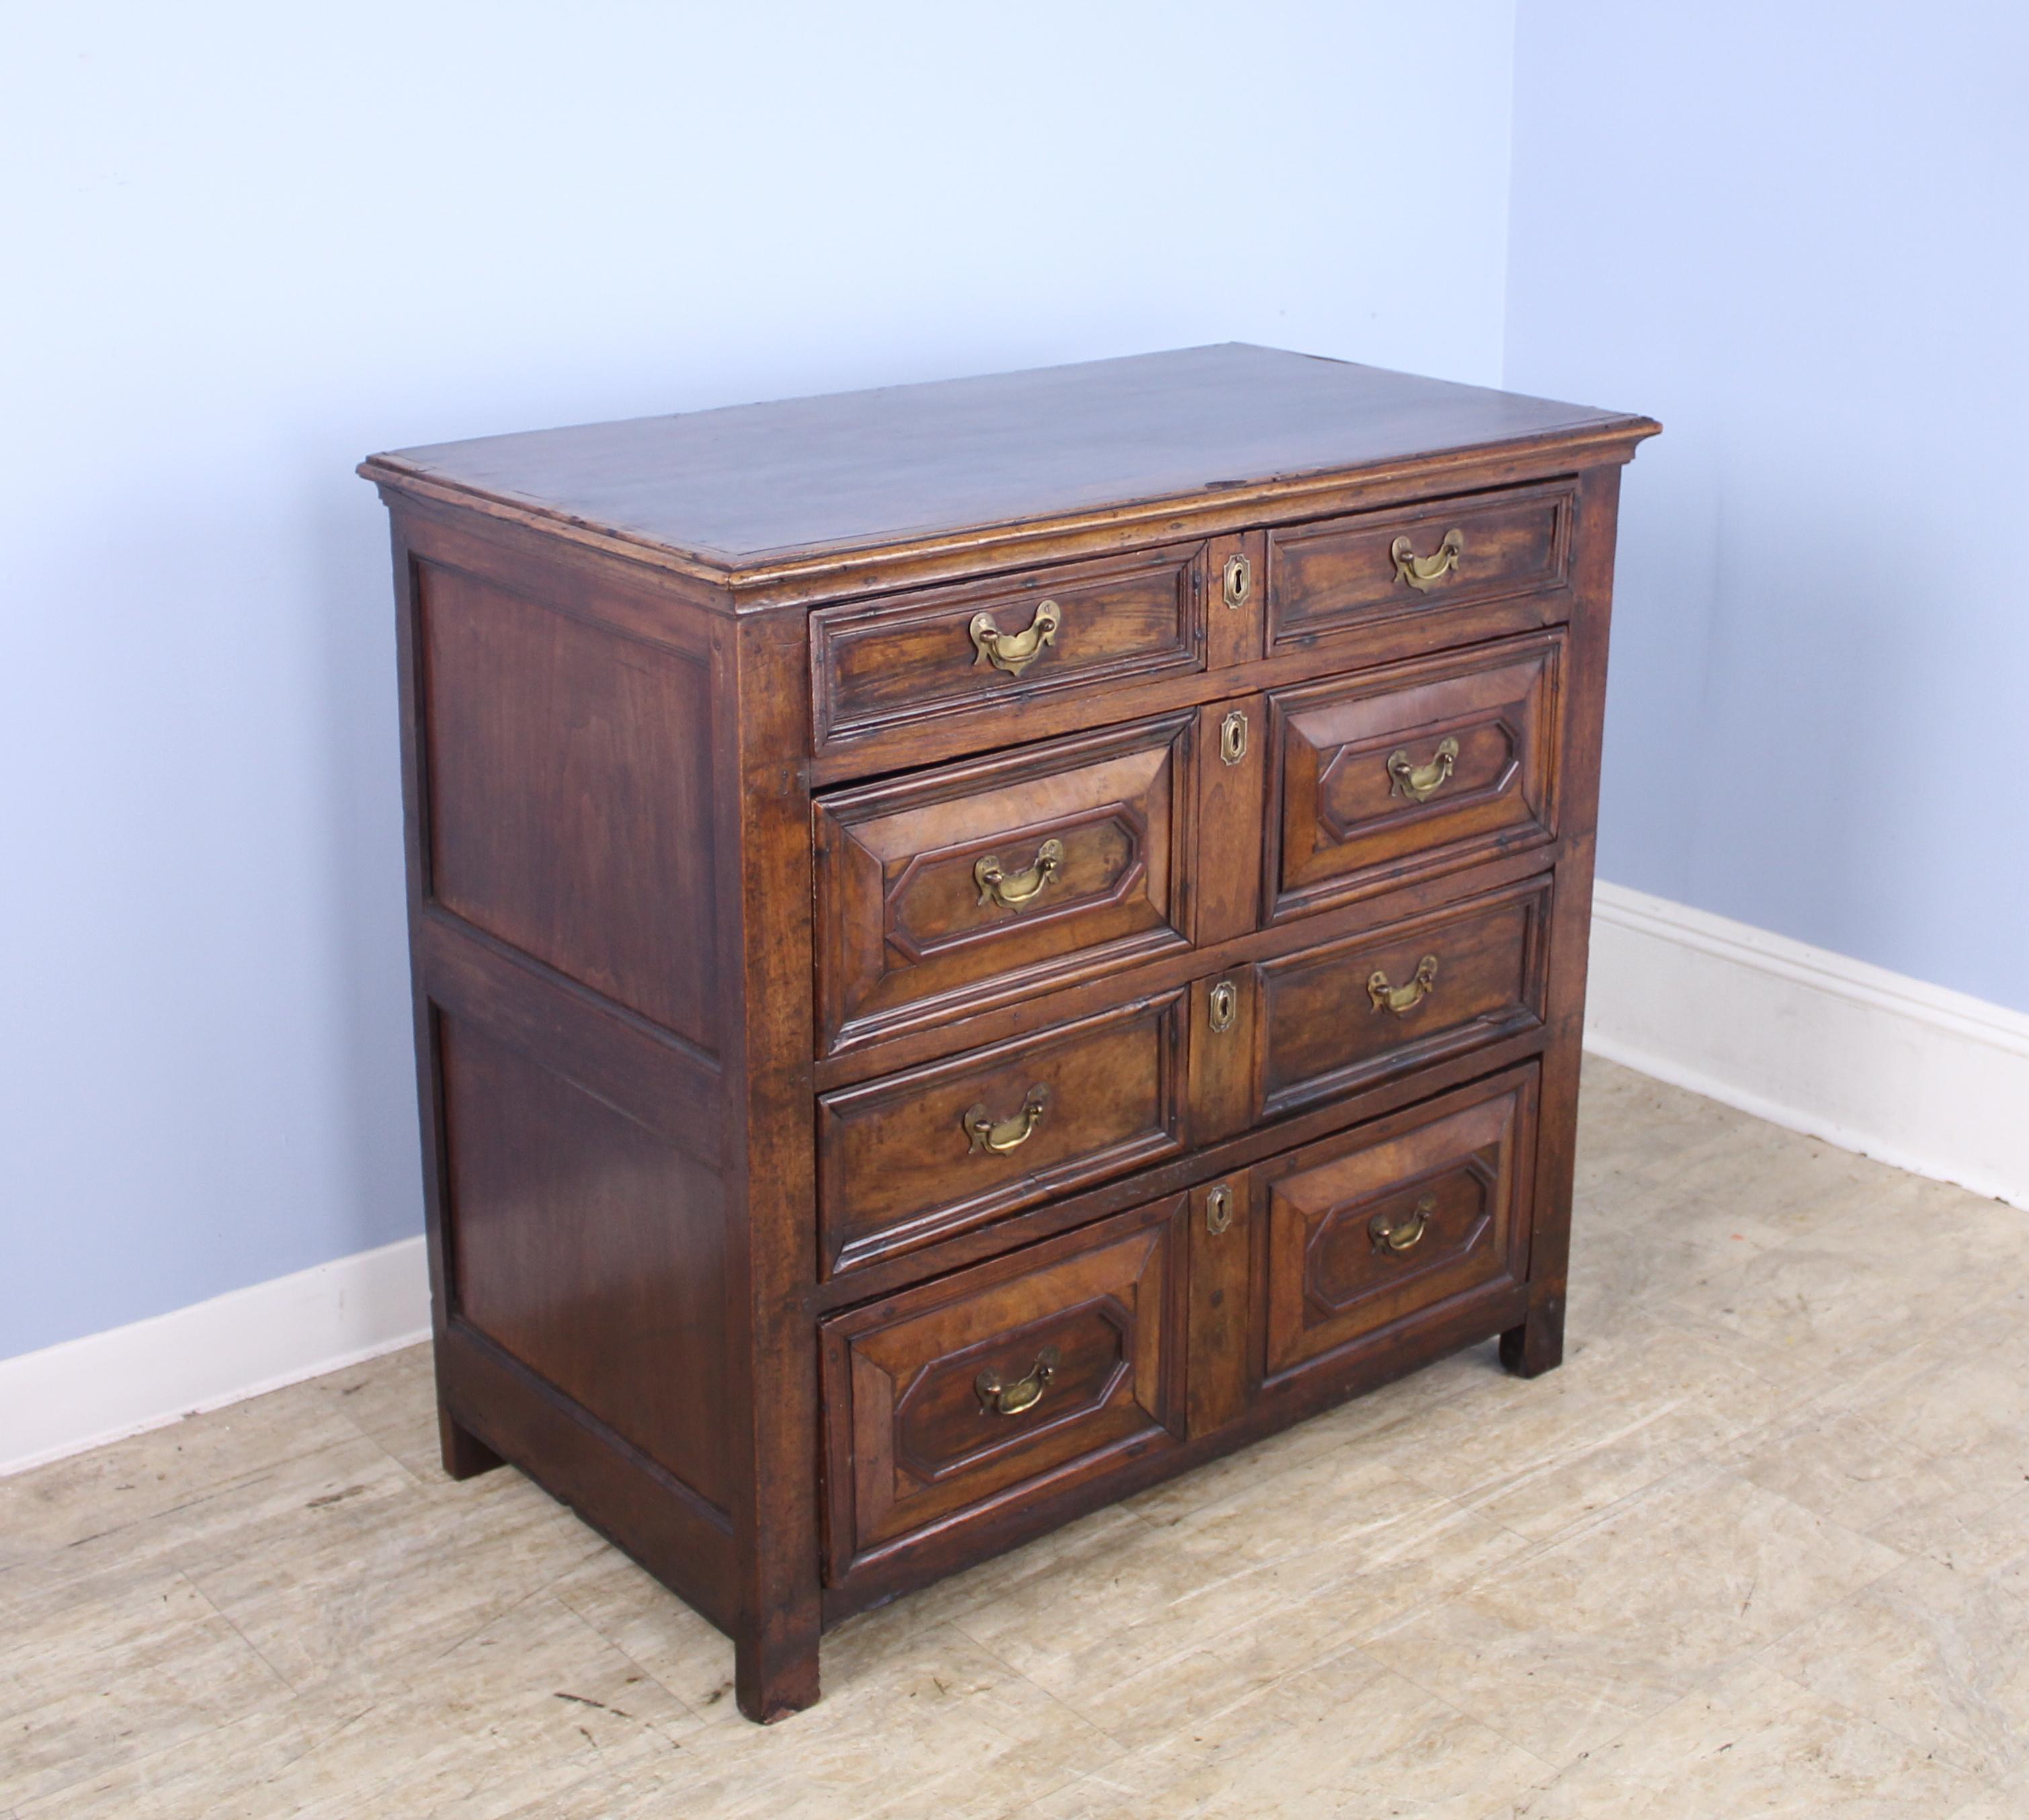 A fine example of a period Jacobean moulded chest of drawers, with inset panels on the side and a raised geometric pattern on the drawers. The color and patina of the walnut are superb. Original brass handles. There is some distress and separation